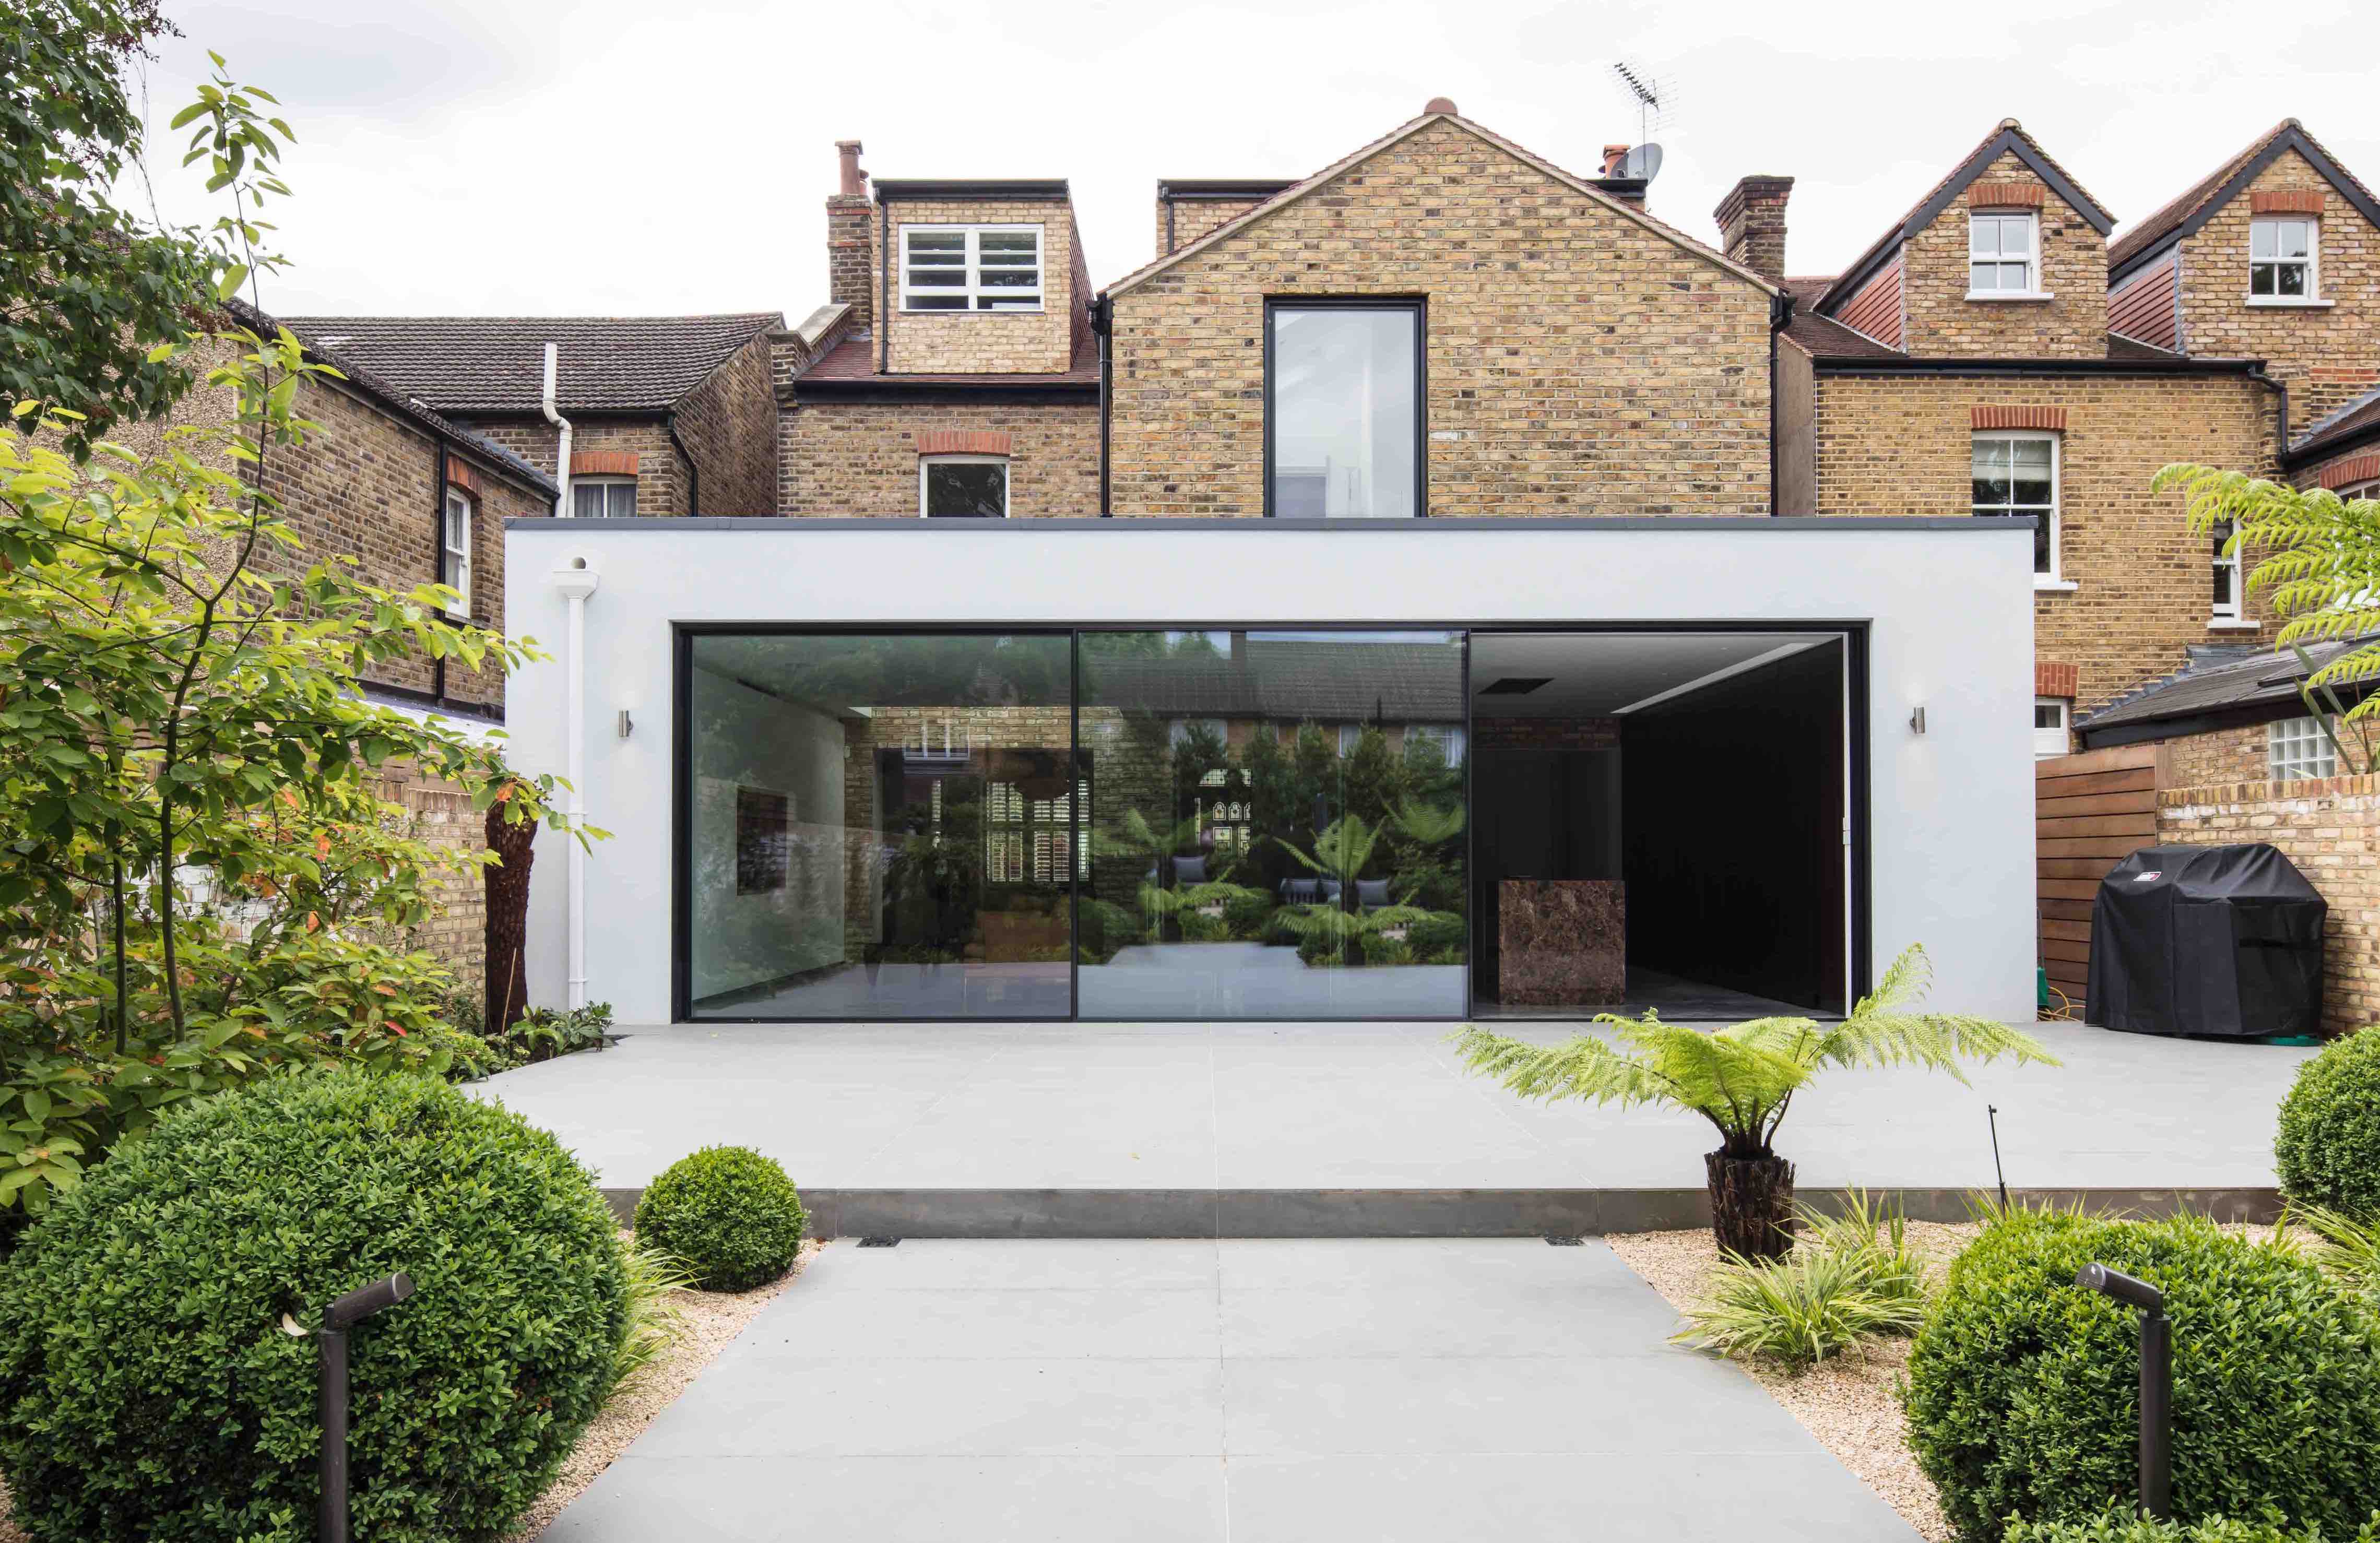 </p> <p>Find your ideal home design pro on designfor-me.com - get matched and see who's interested in your home project. Click image to see more inspiration from our design pros</p> <p>Design by Daniel, architect from Islington, London</p> <p>#architecture #homedesign #modernhomes #homeinspiration #extensions #extensiondesign #extensioninspiration #extensionideas #houseextension #slidingdoors </p> <p>